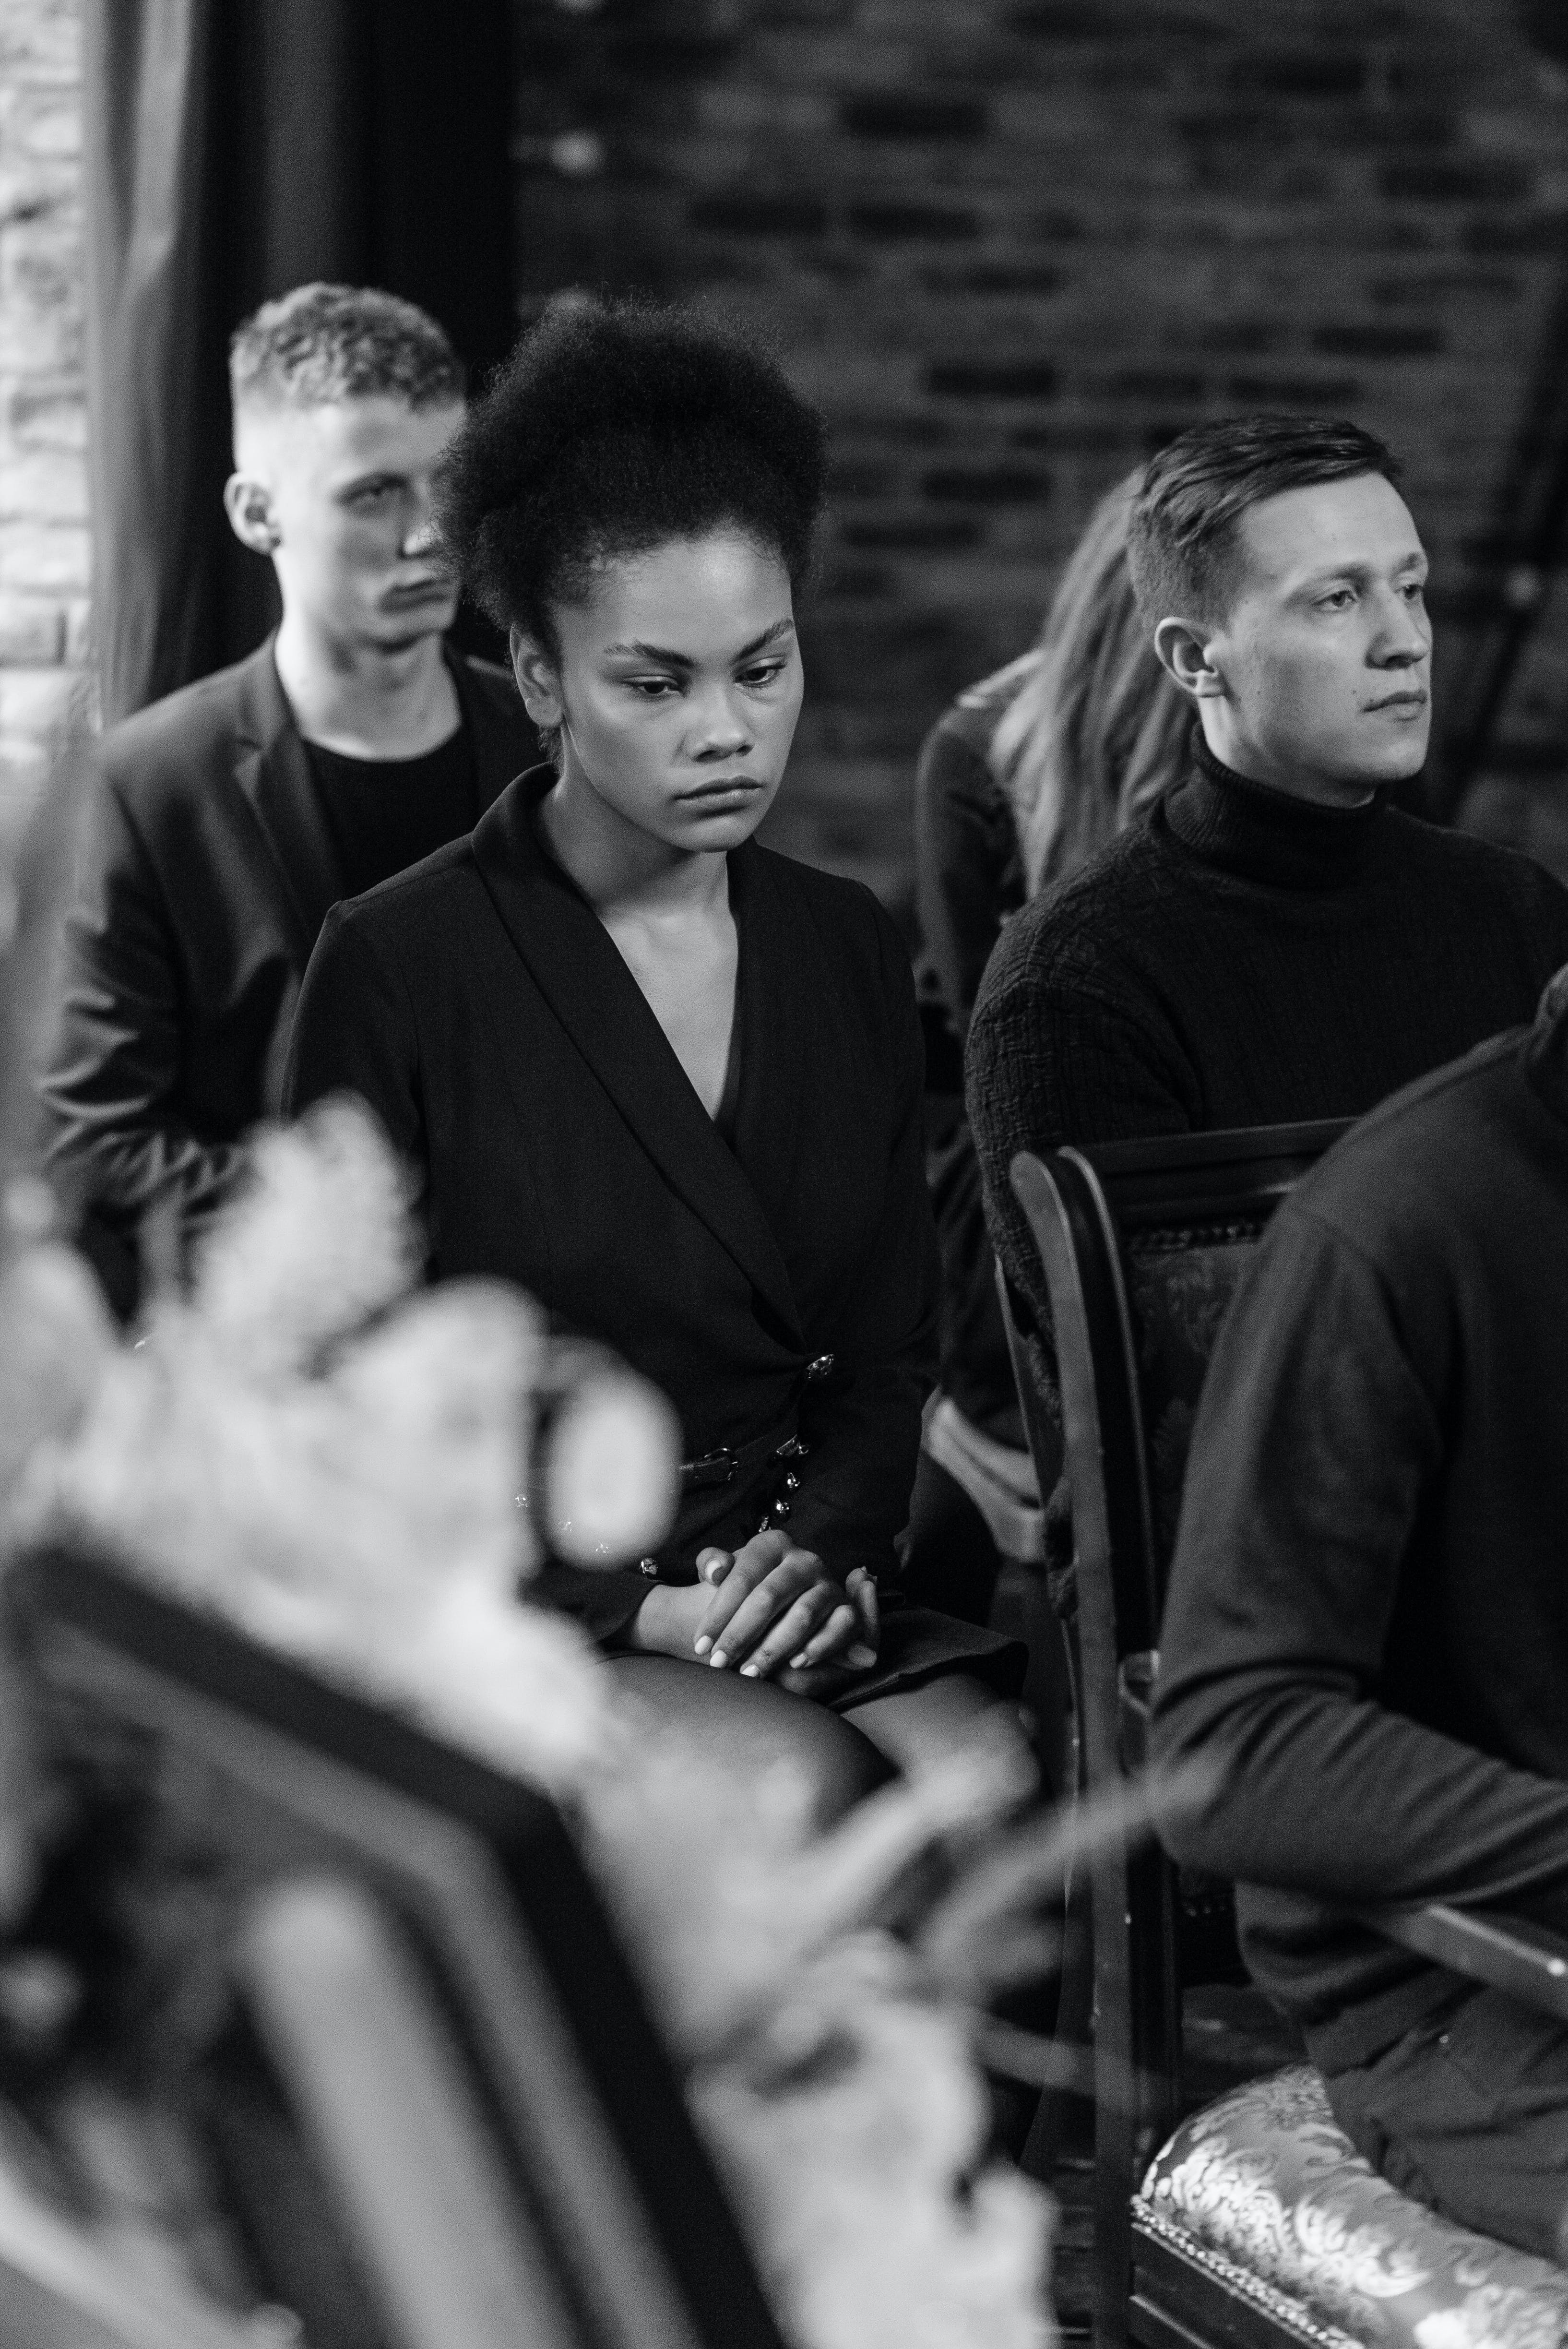 People sited in chairs at a funeral. | Source: Pexels